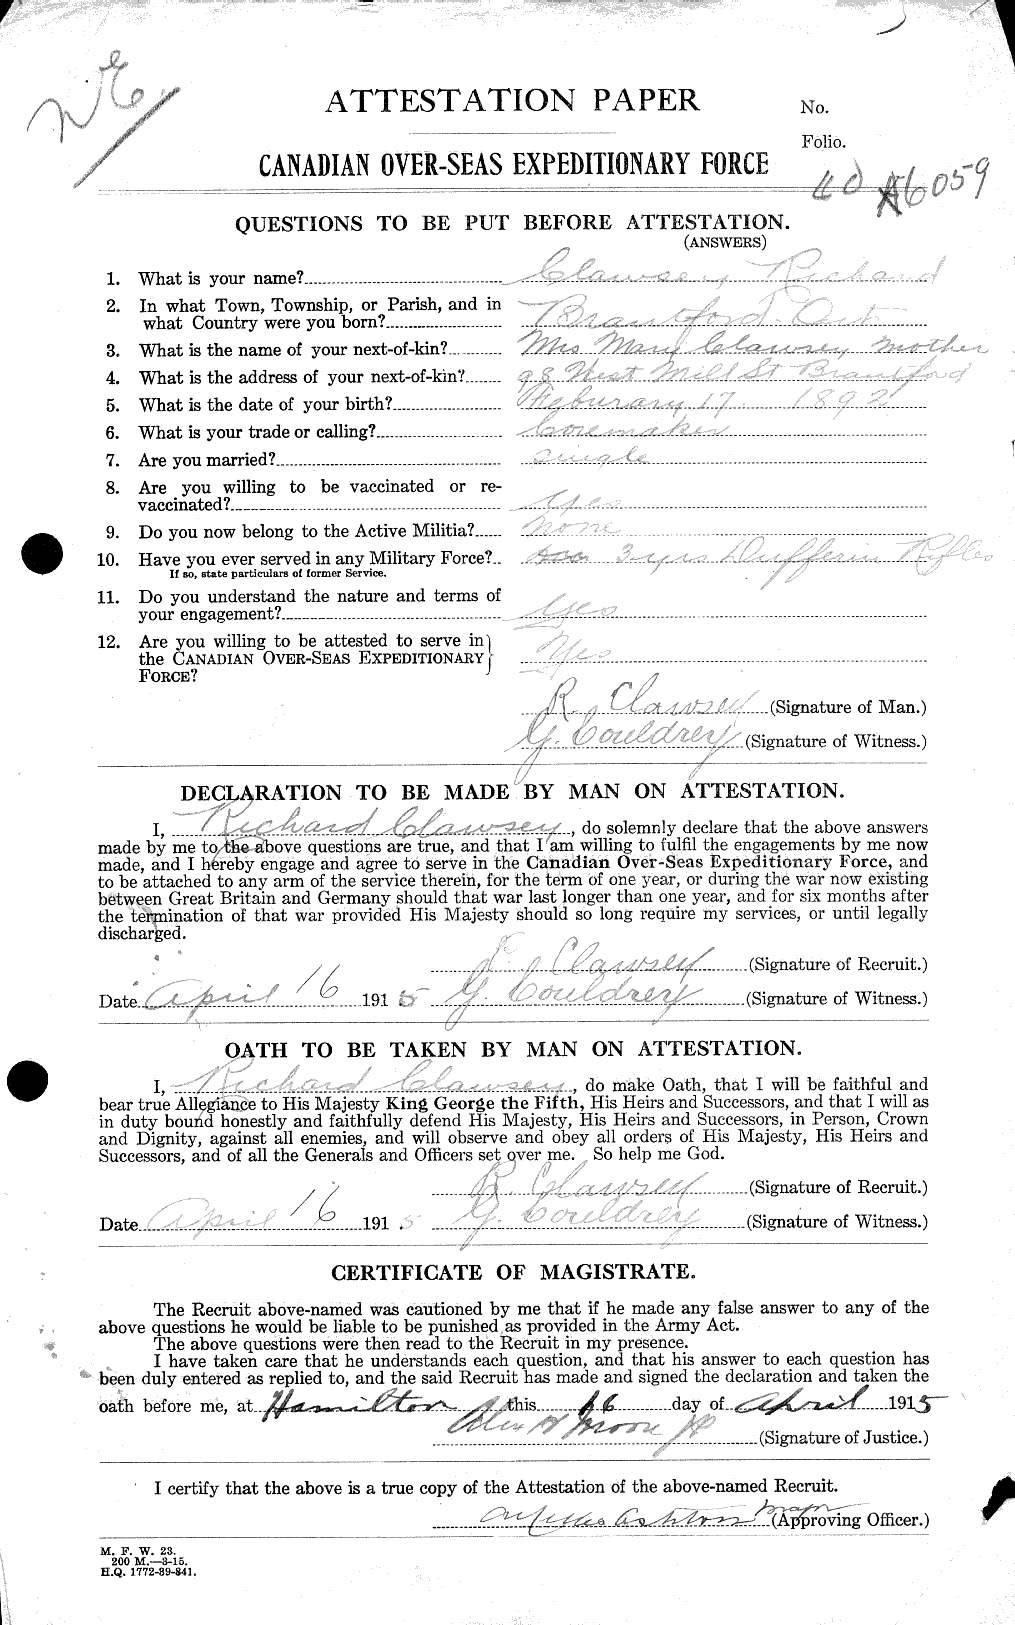 Personnel Records of the First World War - CEF 019128a